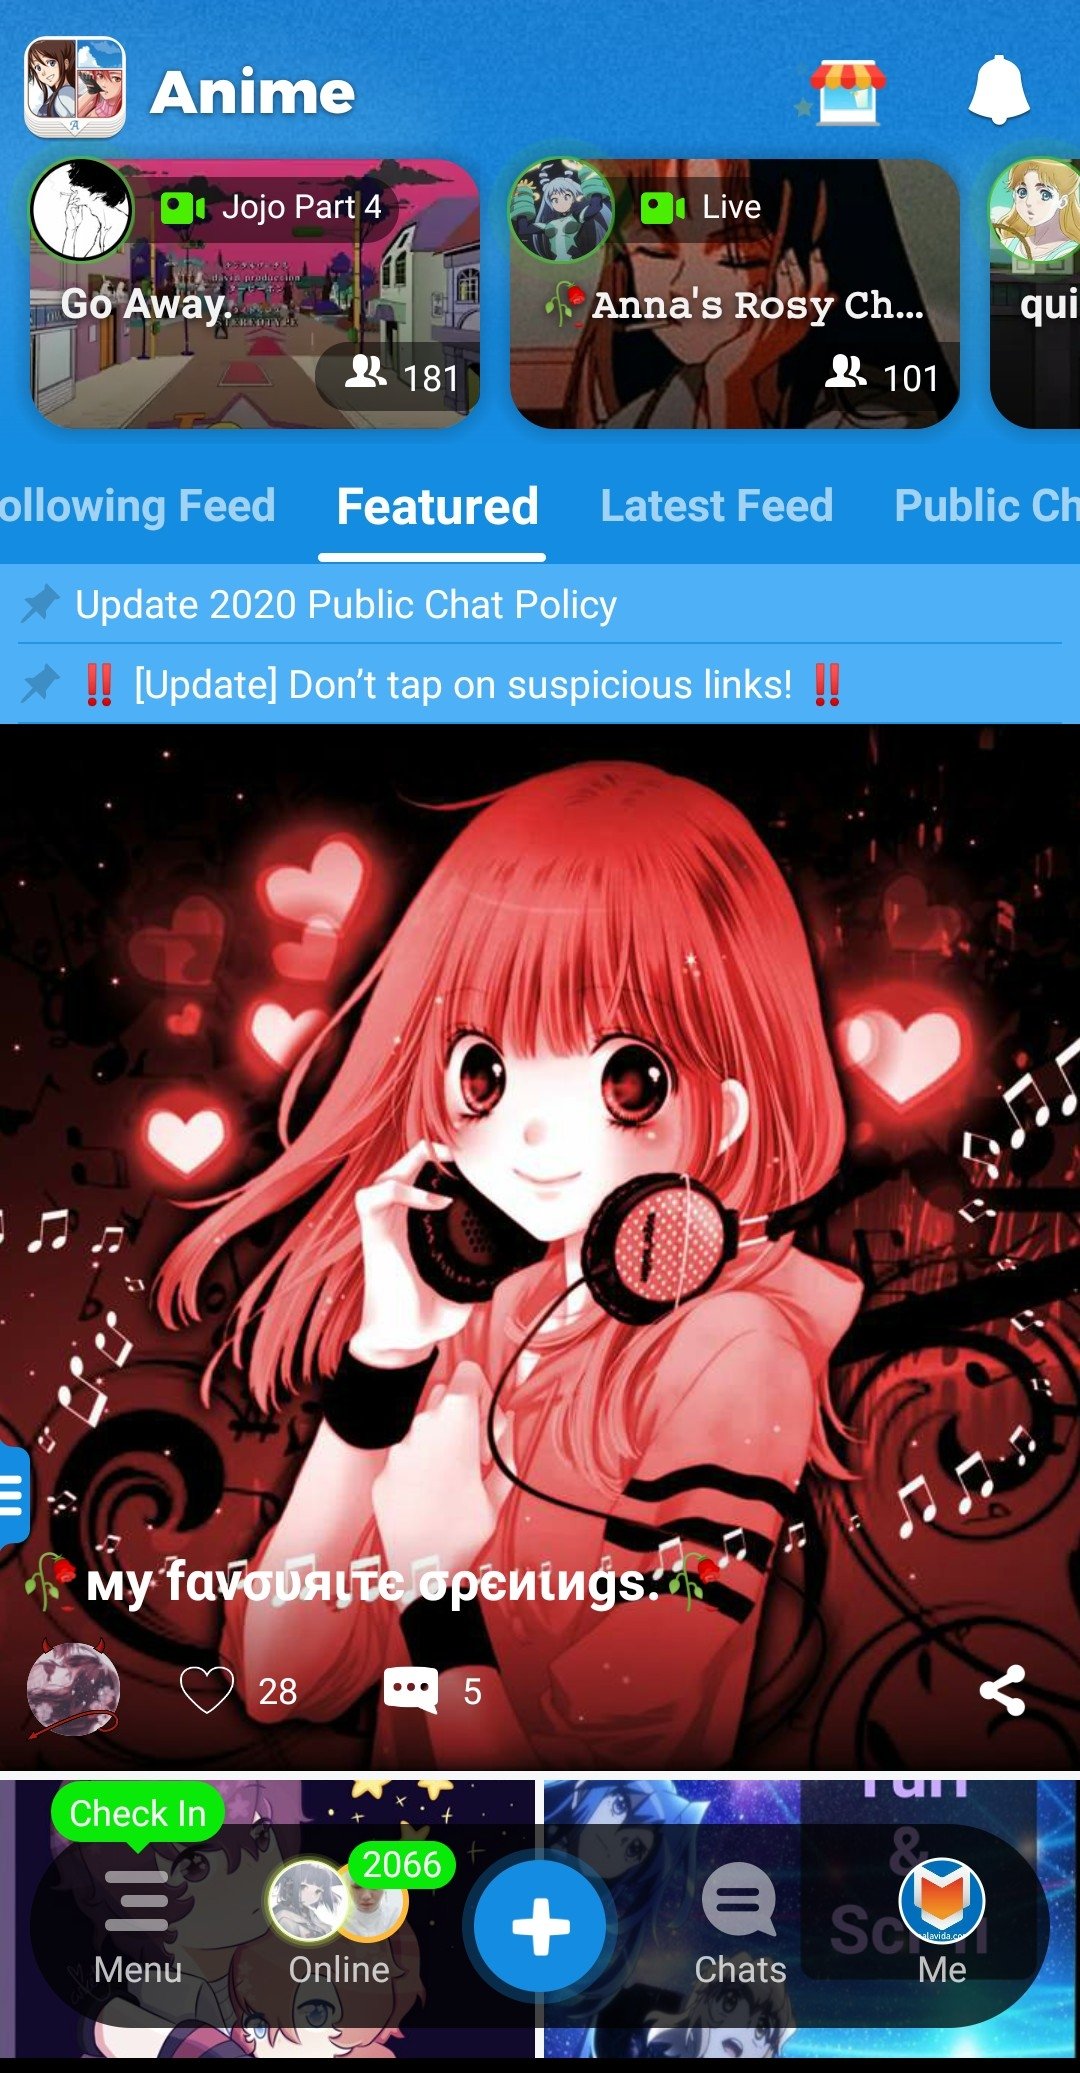 Meus Animes APK for Android Download